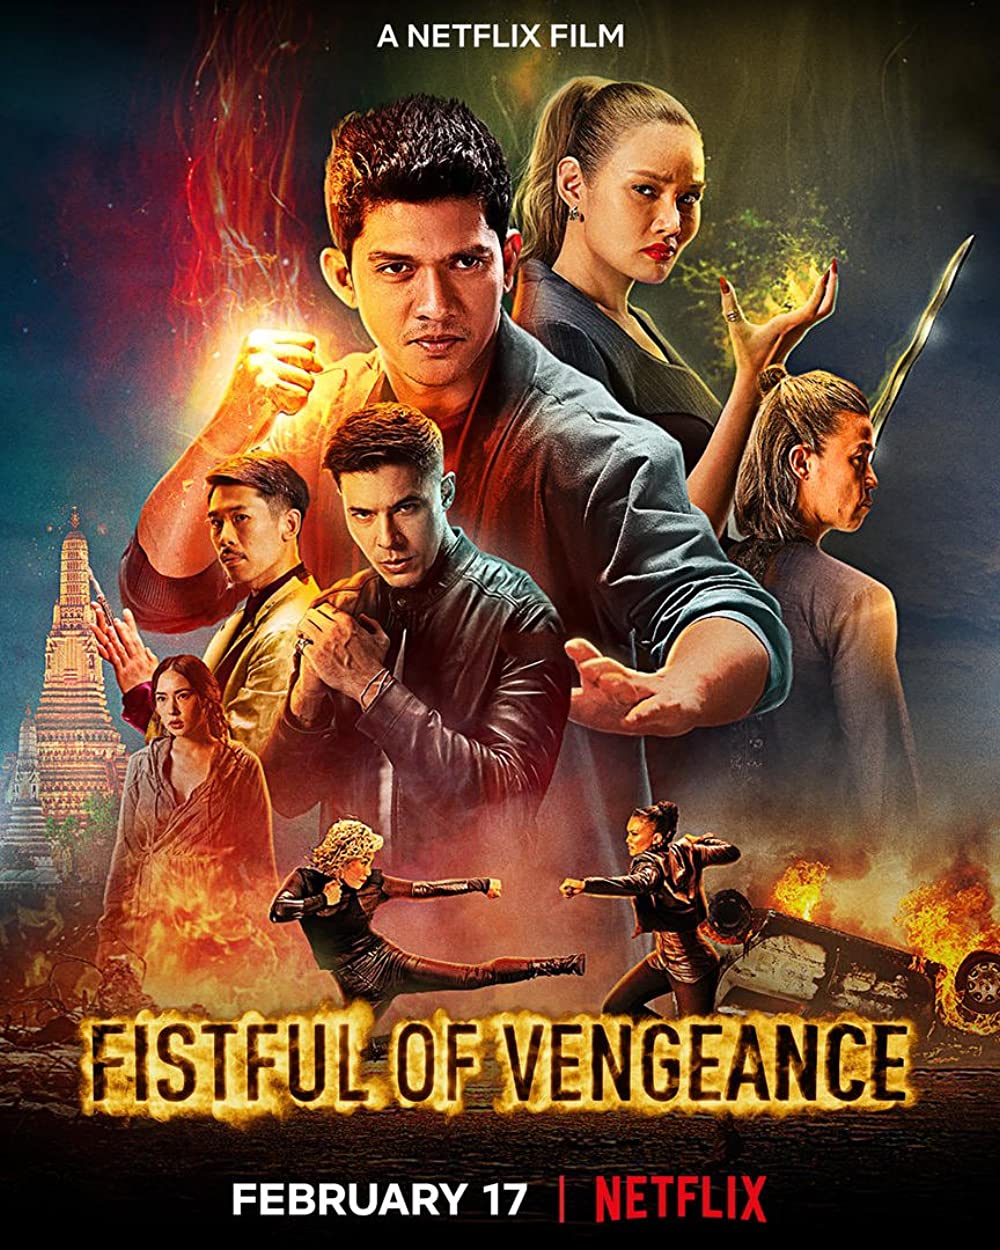 Will Netflix premiere the movie Fistful of Vengeance (2022)